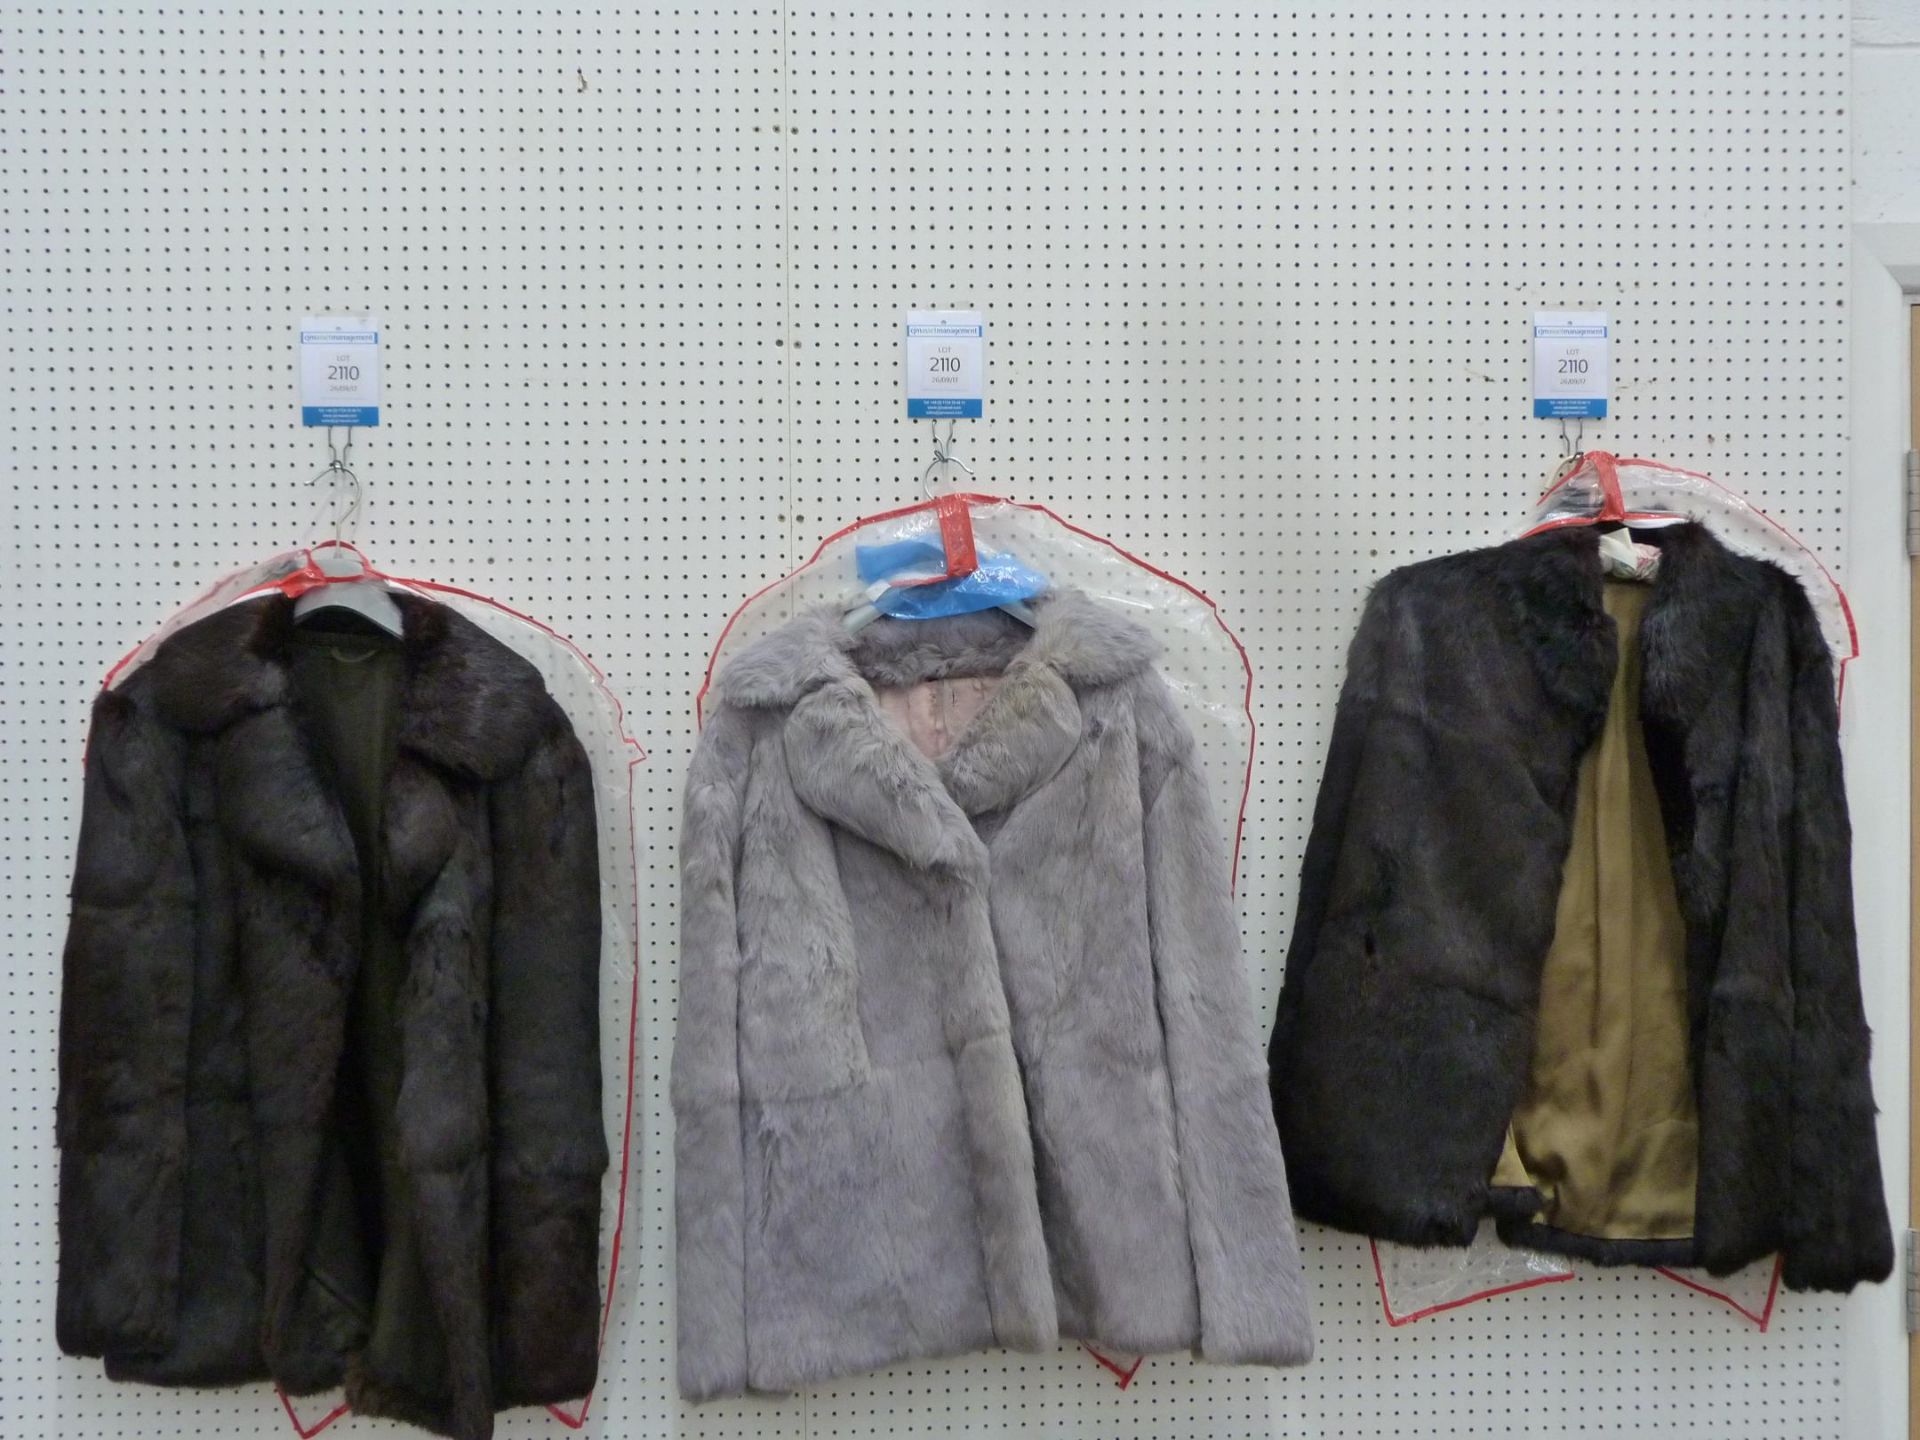 Three Ladies Fur Jackets - Two Rabbit Fur (?) and the Third is Labelled as Real Coney Fur. One Label